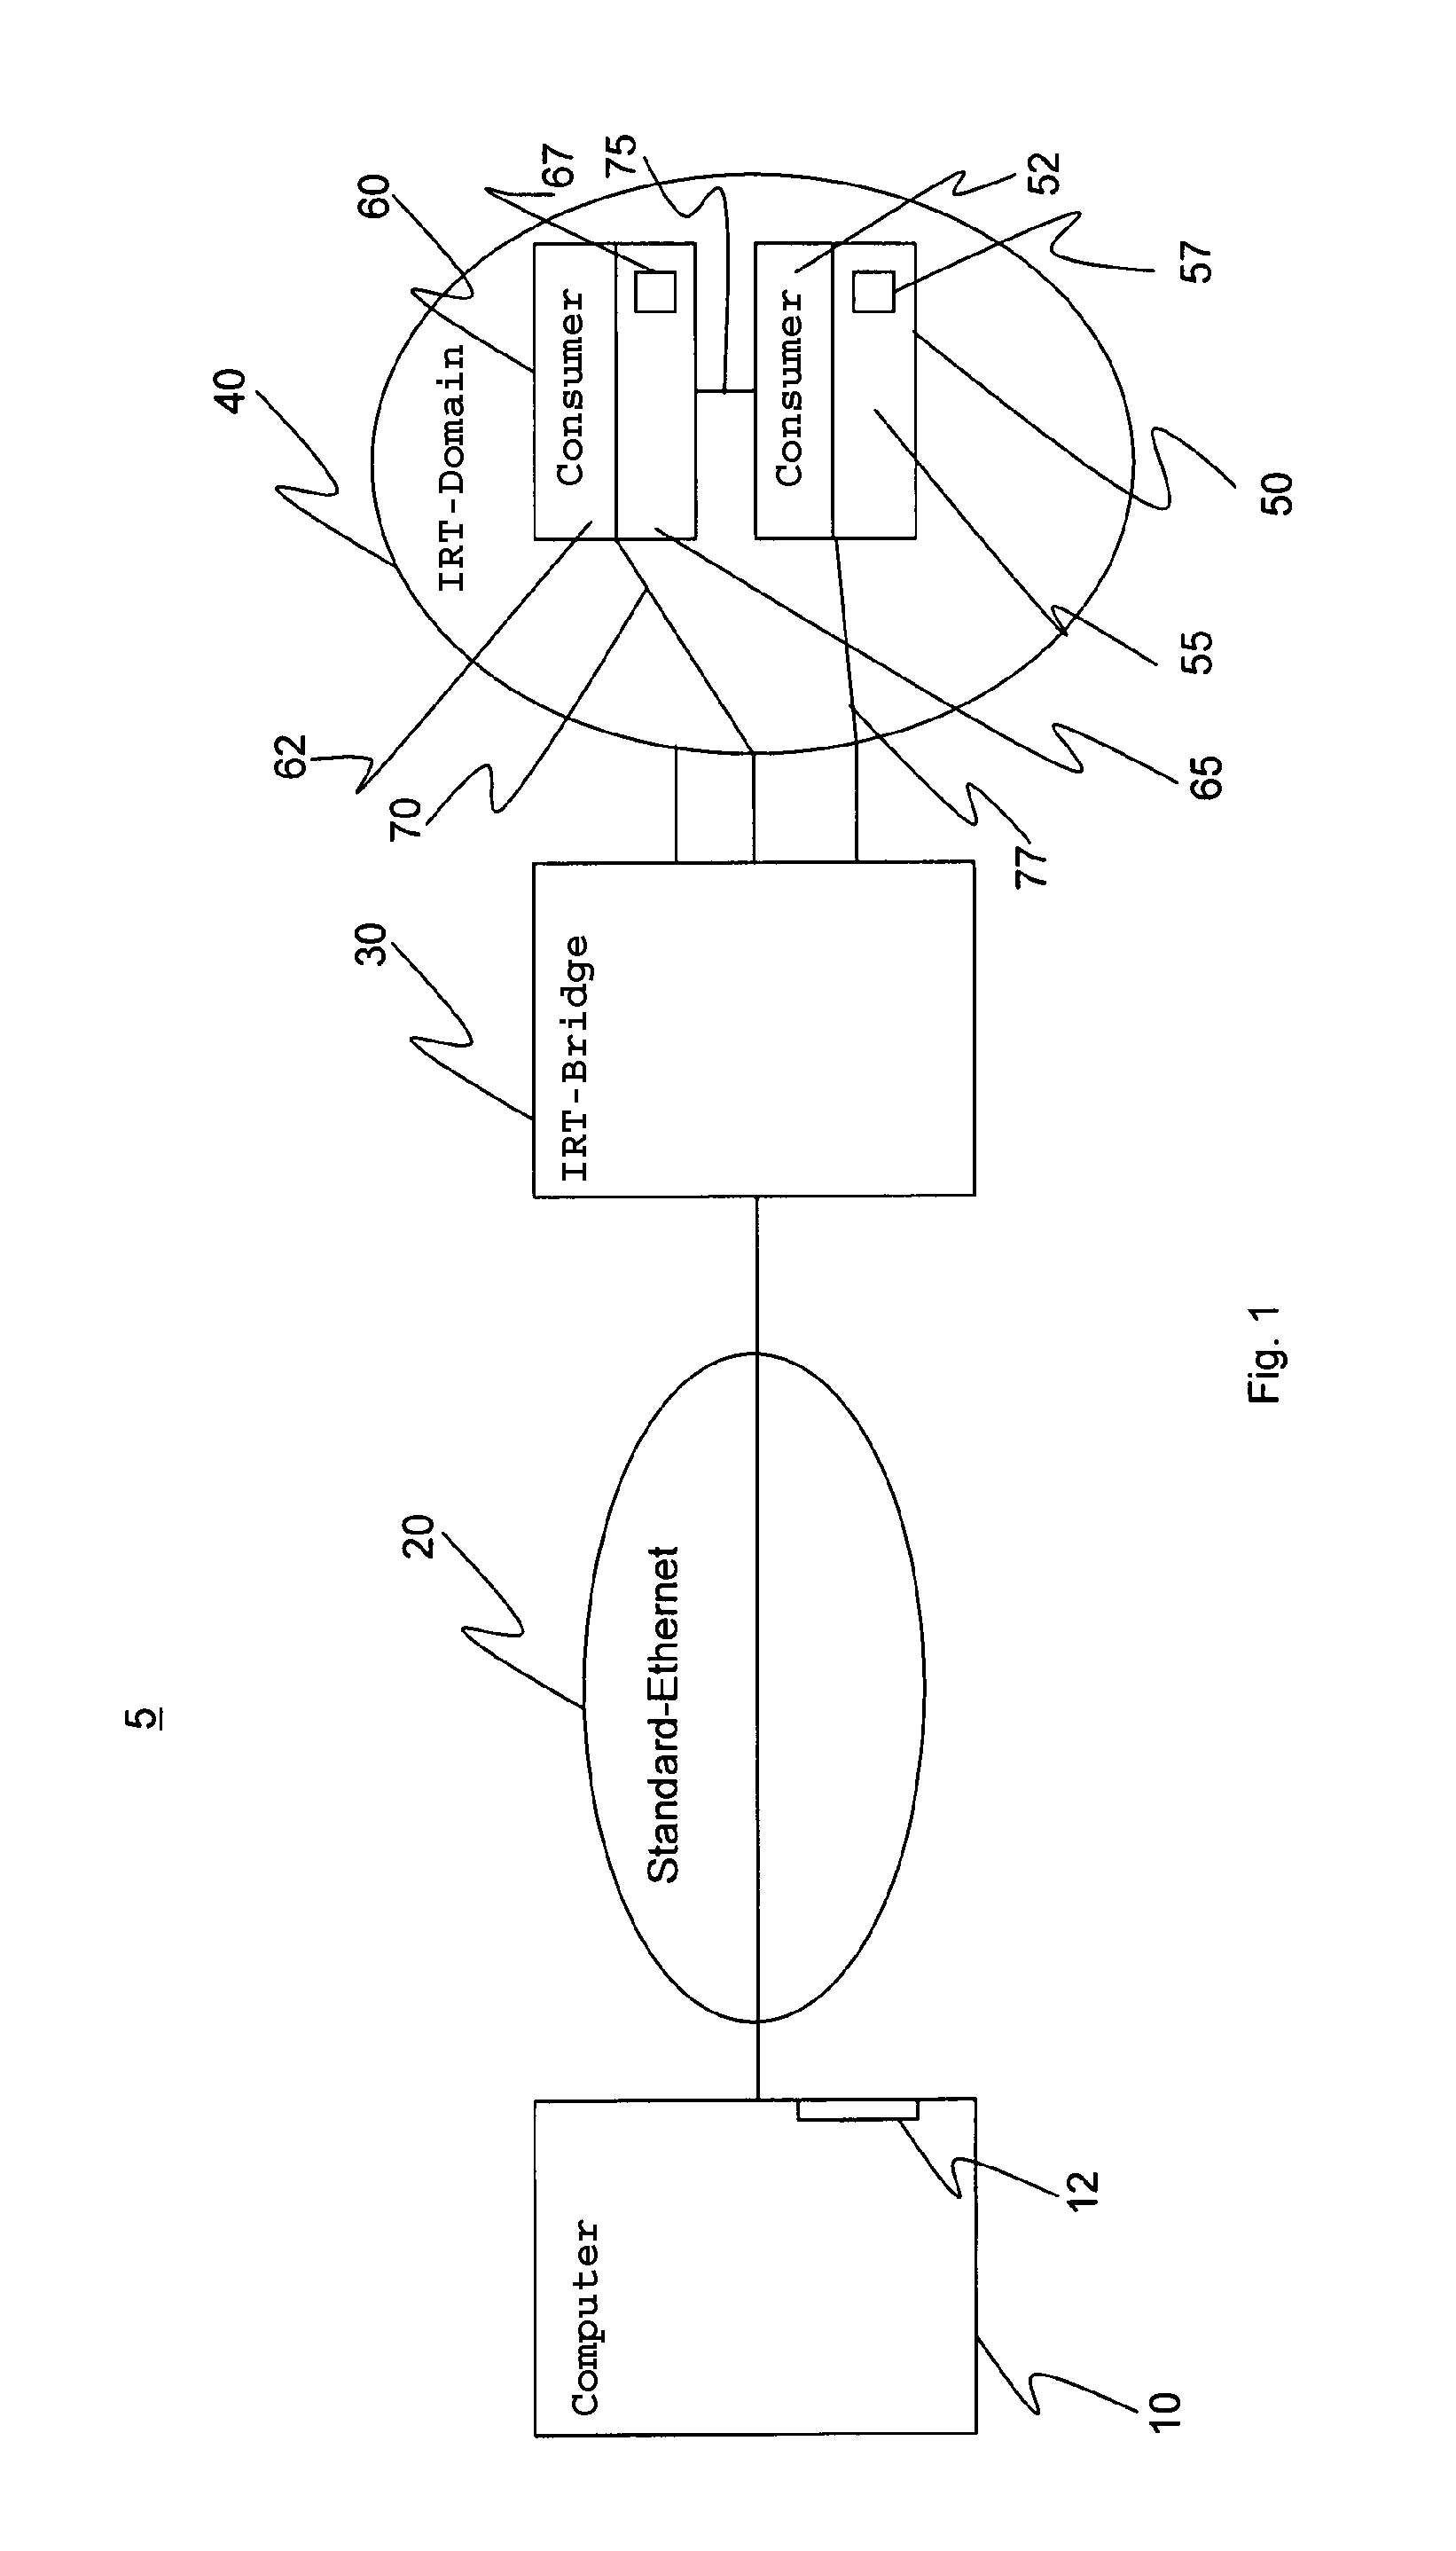 Communication system and method for isochronous data transmission in real time